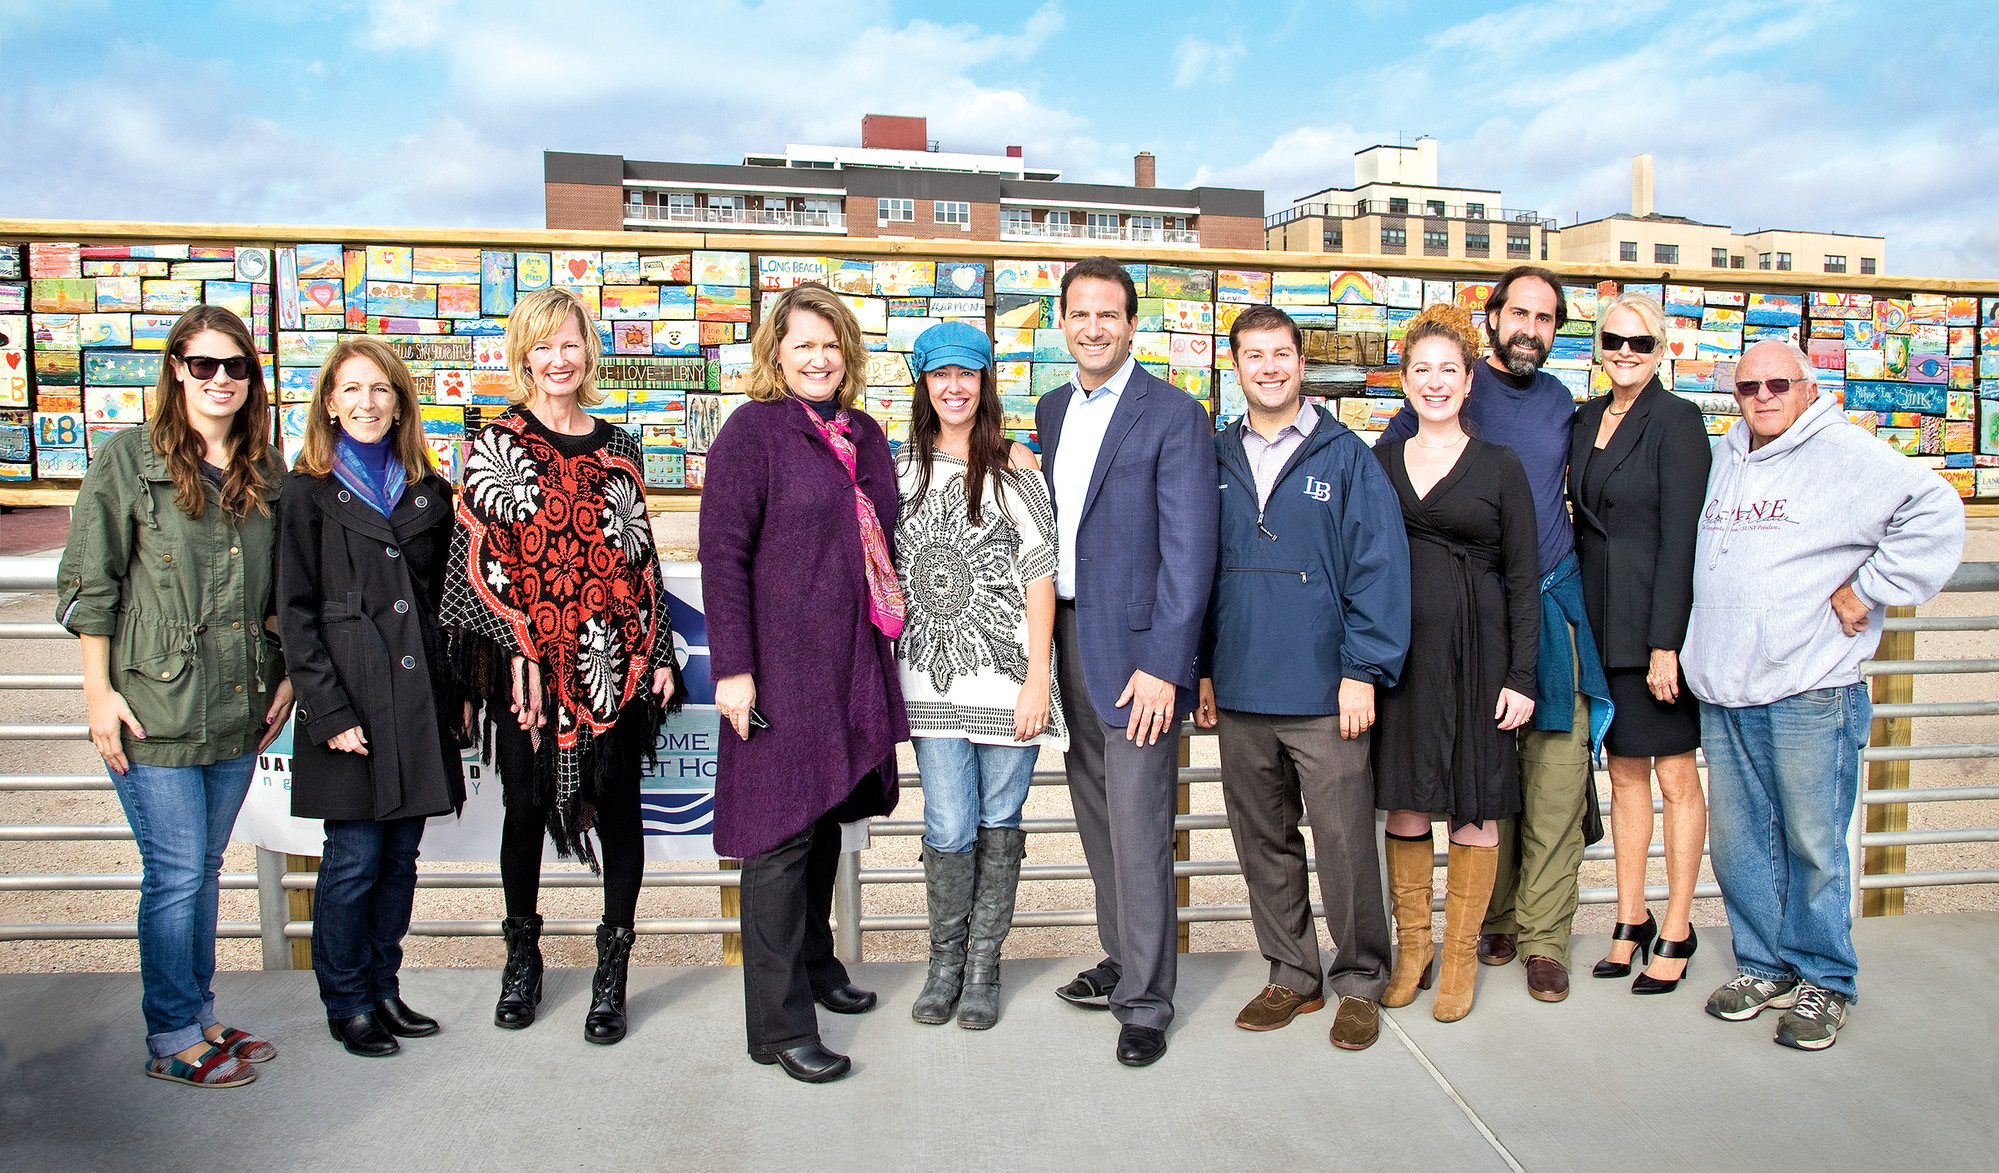 West End Artist Abby Road, far left, City Council Vice President Fran Adelson, Councilwoman Eileen Goggin, West End Arts Vice President Elizabeth Connolly, West End Arts President Jennifer Creed Aly, Councilman Anthony Eramo, City Manager Jack Schnirman and his wife Joanie, Council for the Arts President Arthur Adair and Council for the Arts members Johanna Mathieson and Edward Kennedy.